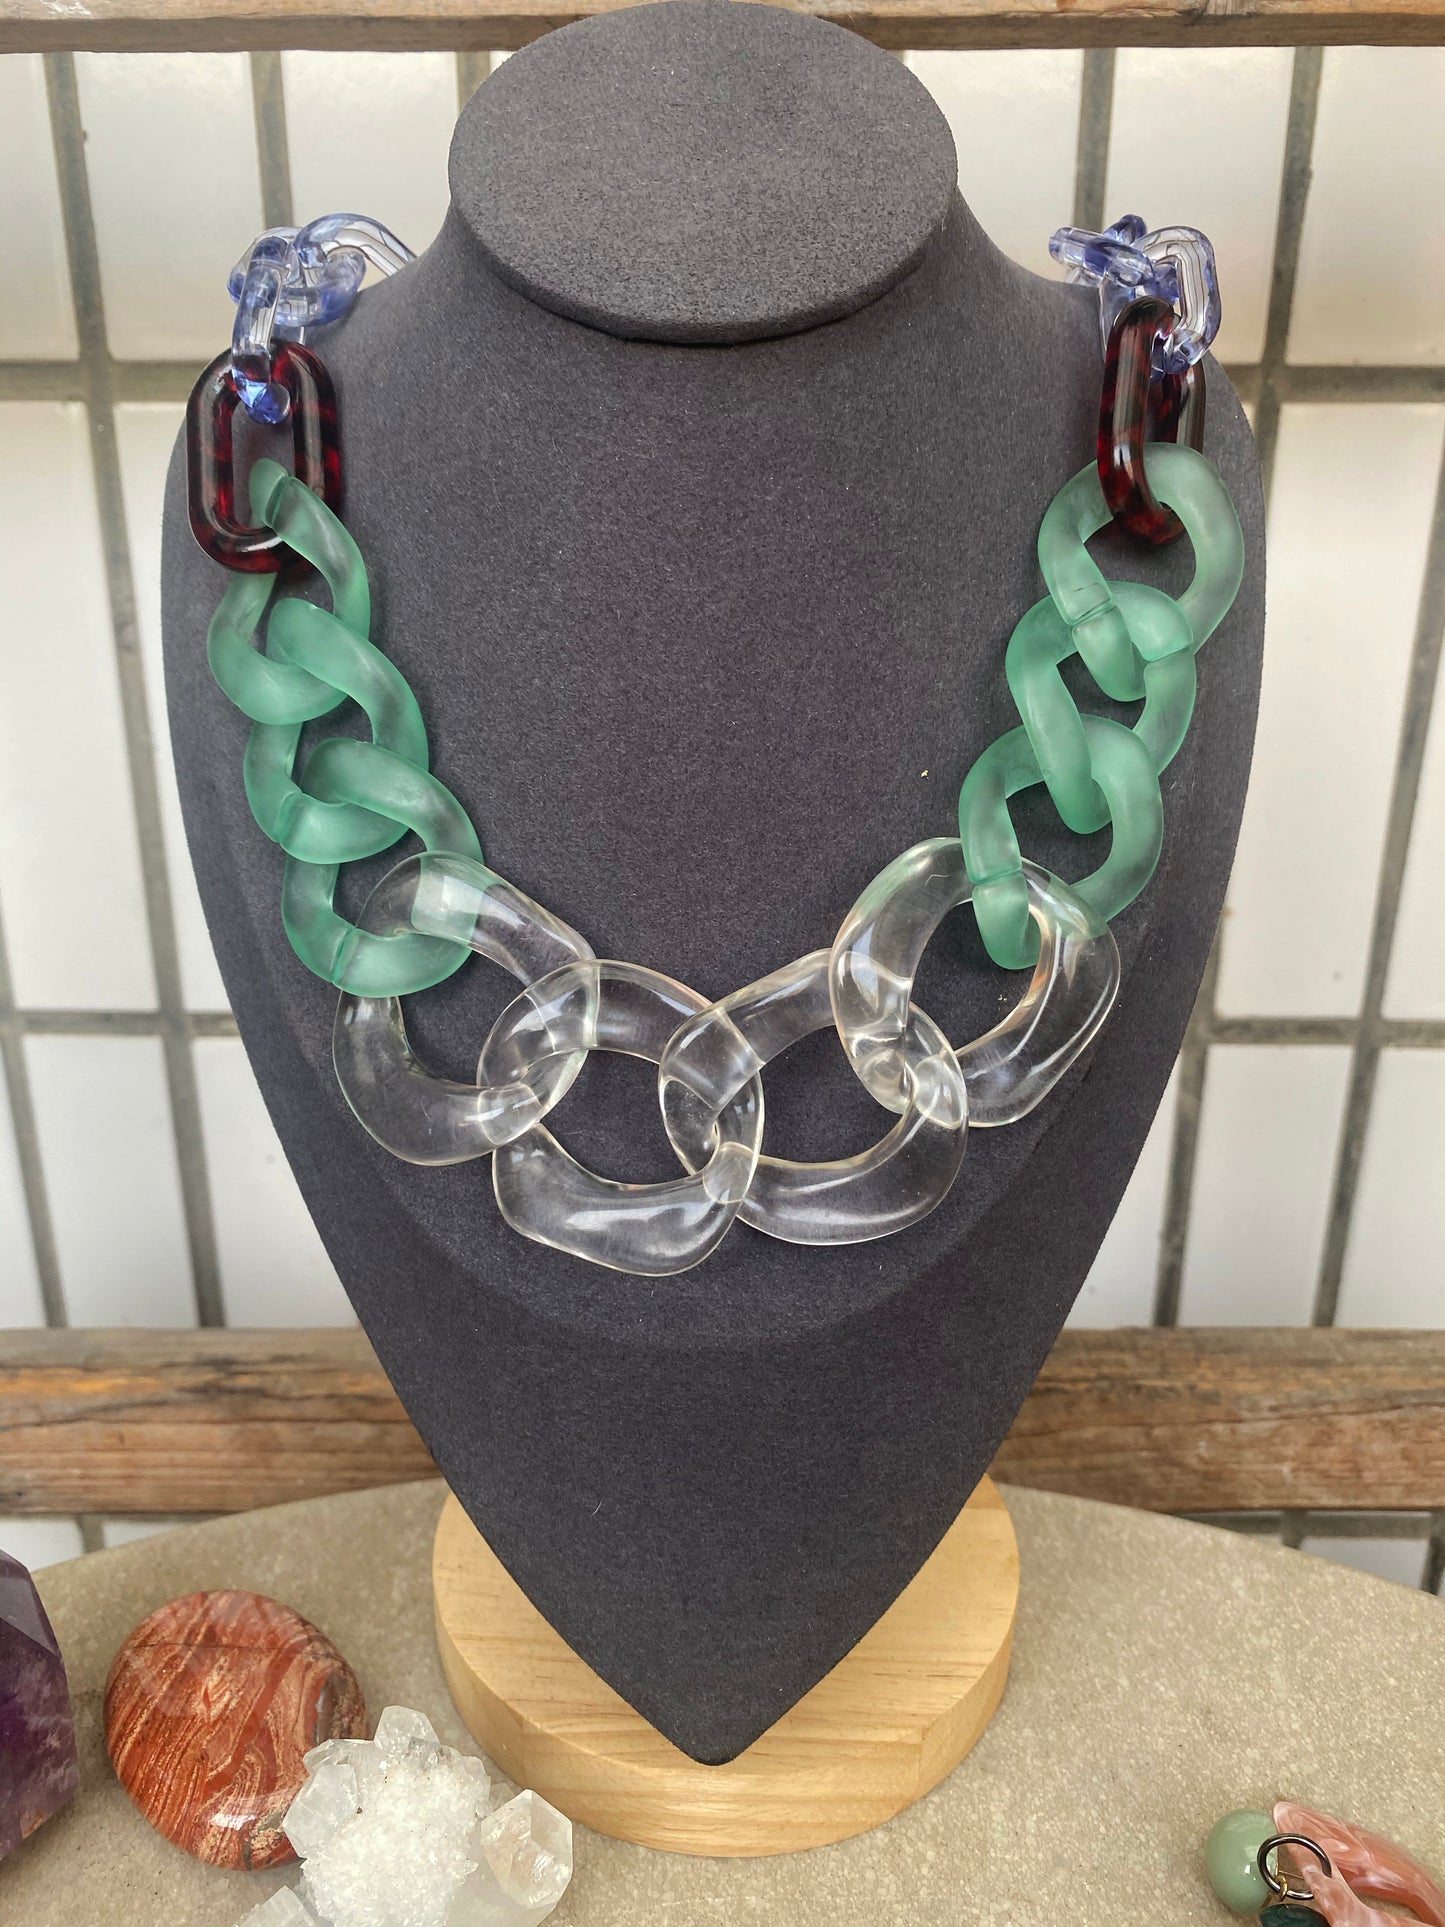 Infinite Colors Cristina Necklace - Clear Blue Gray Teal Red Tortoise